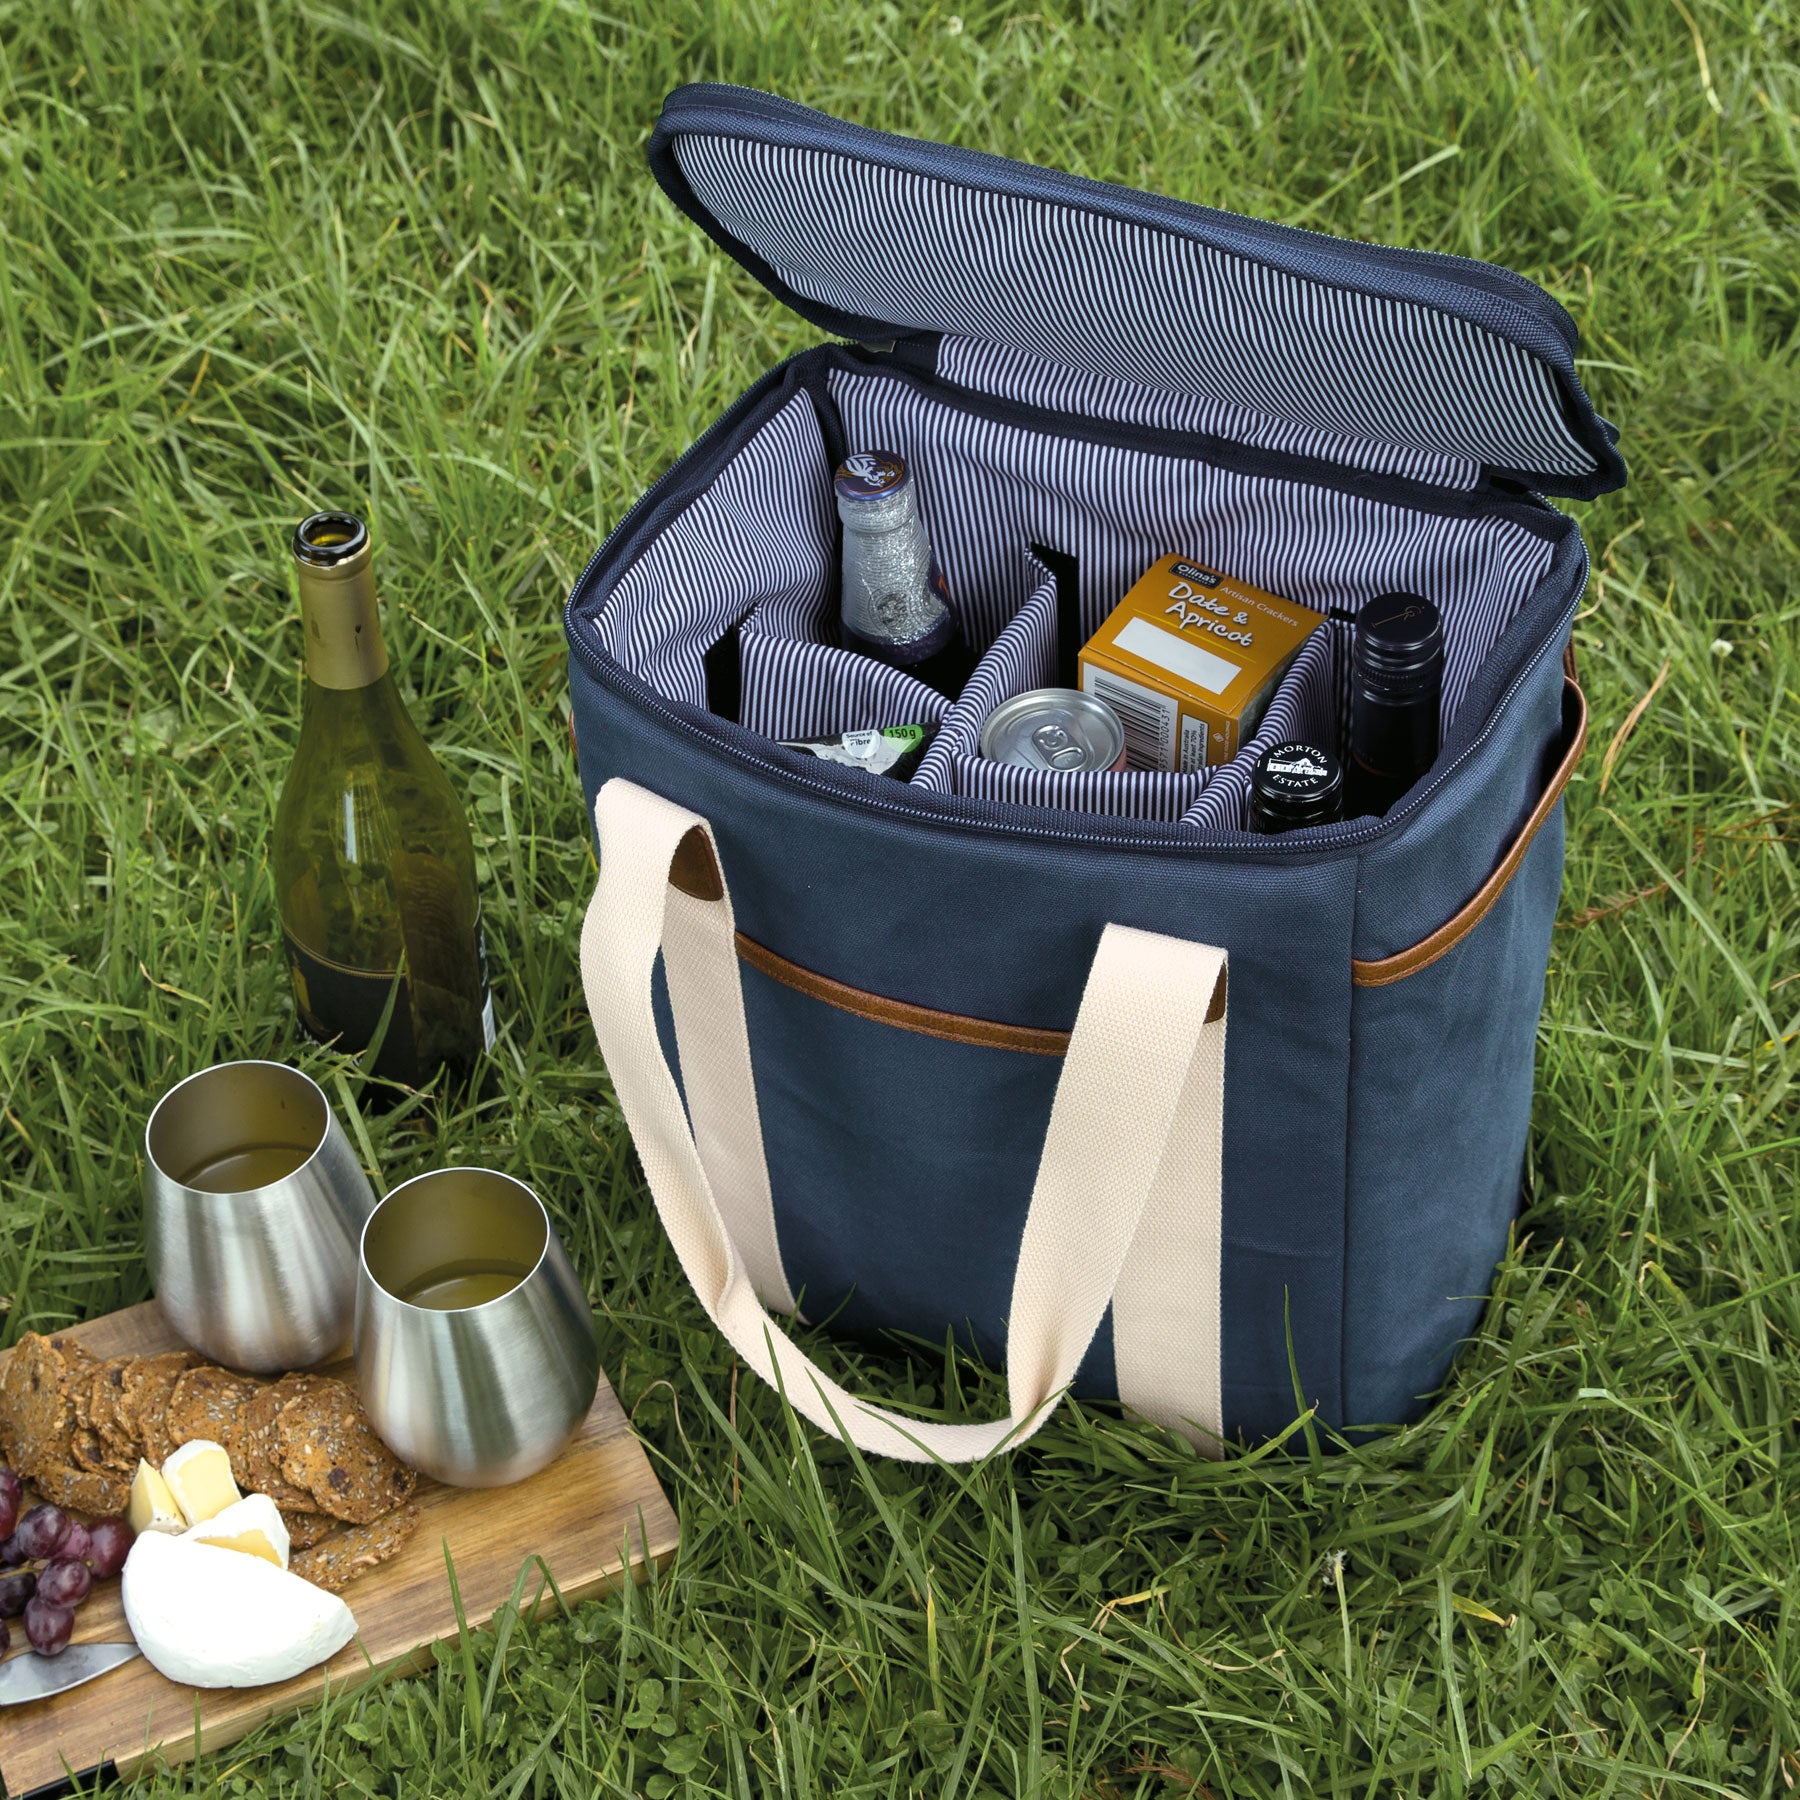 Lifestyle image of navy blue wine cooler on grass filled with picnic foods and wine next to a cheese board